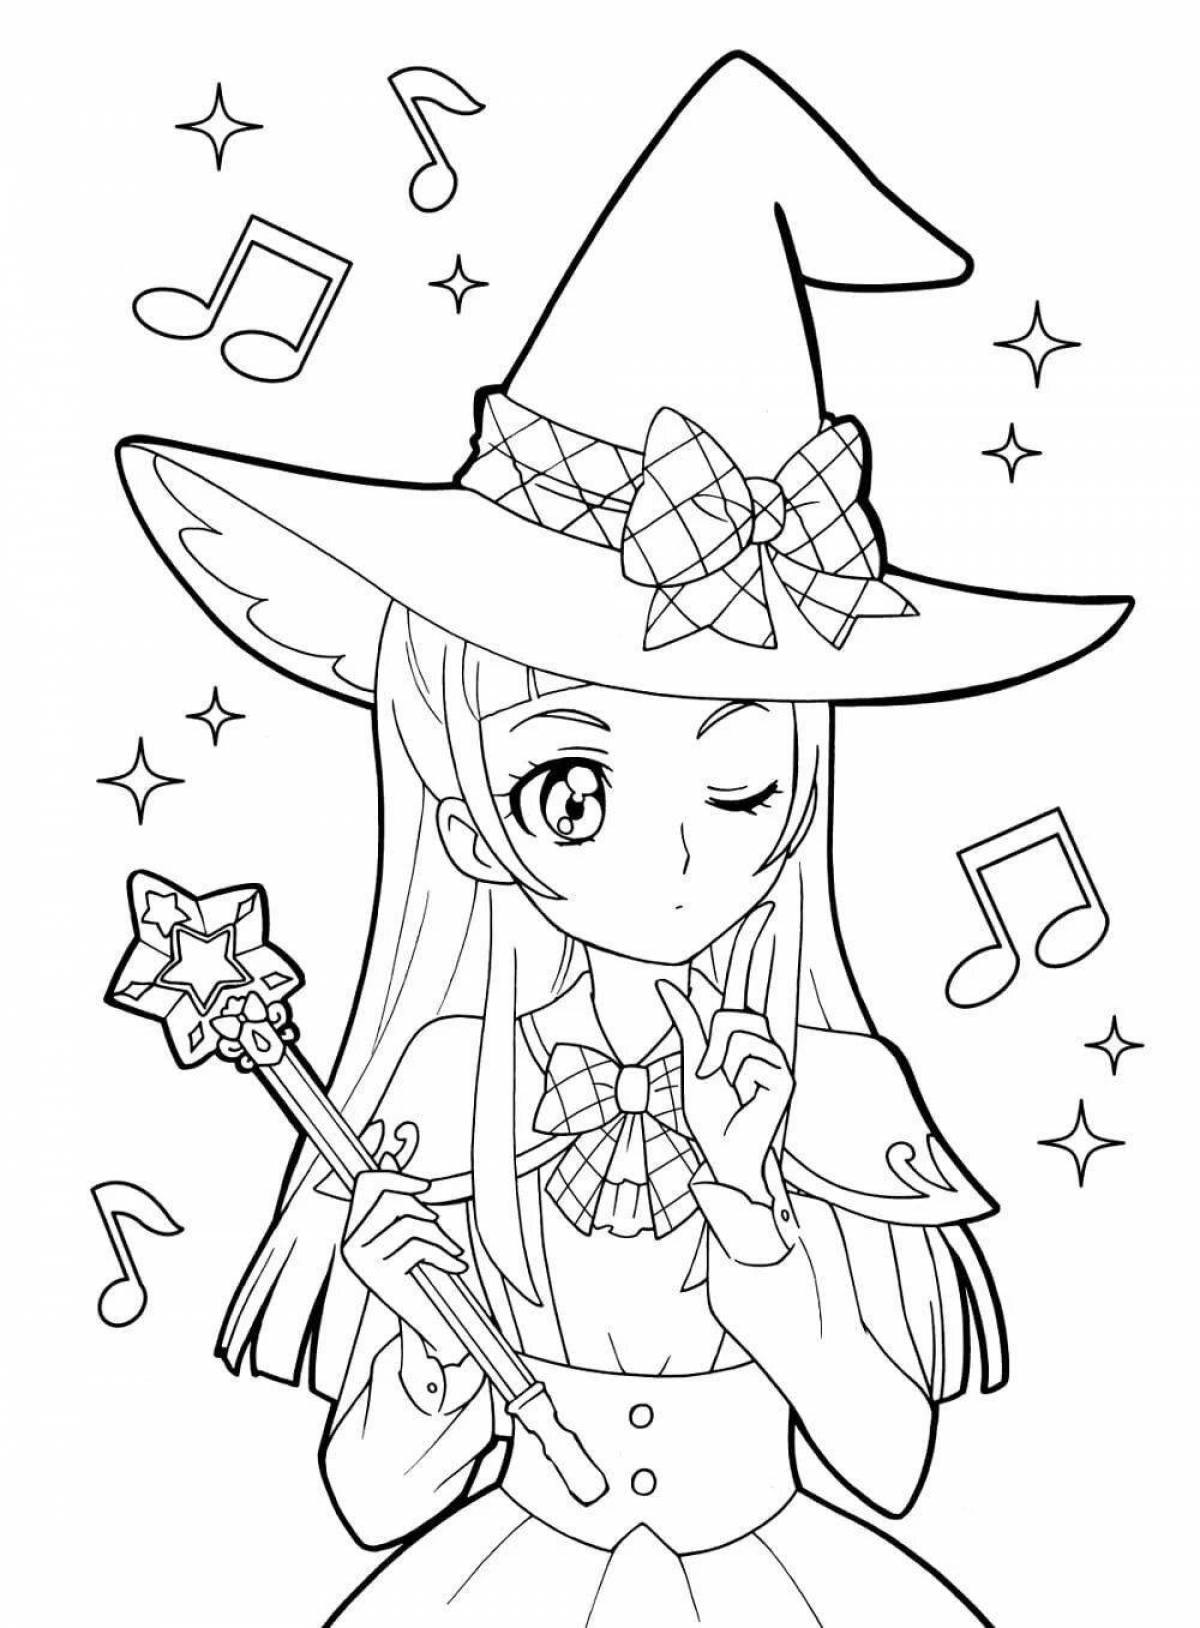 Wonderful halloween coloring book for girls